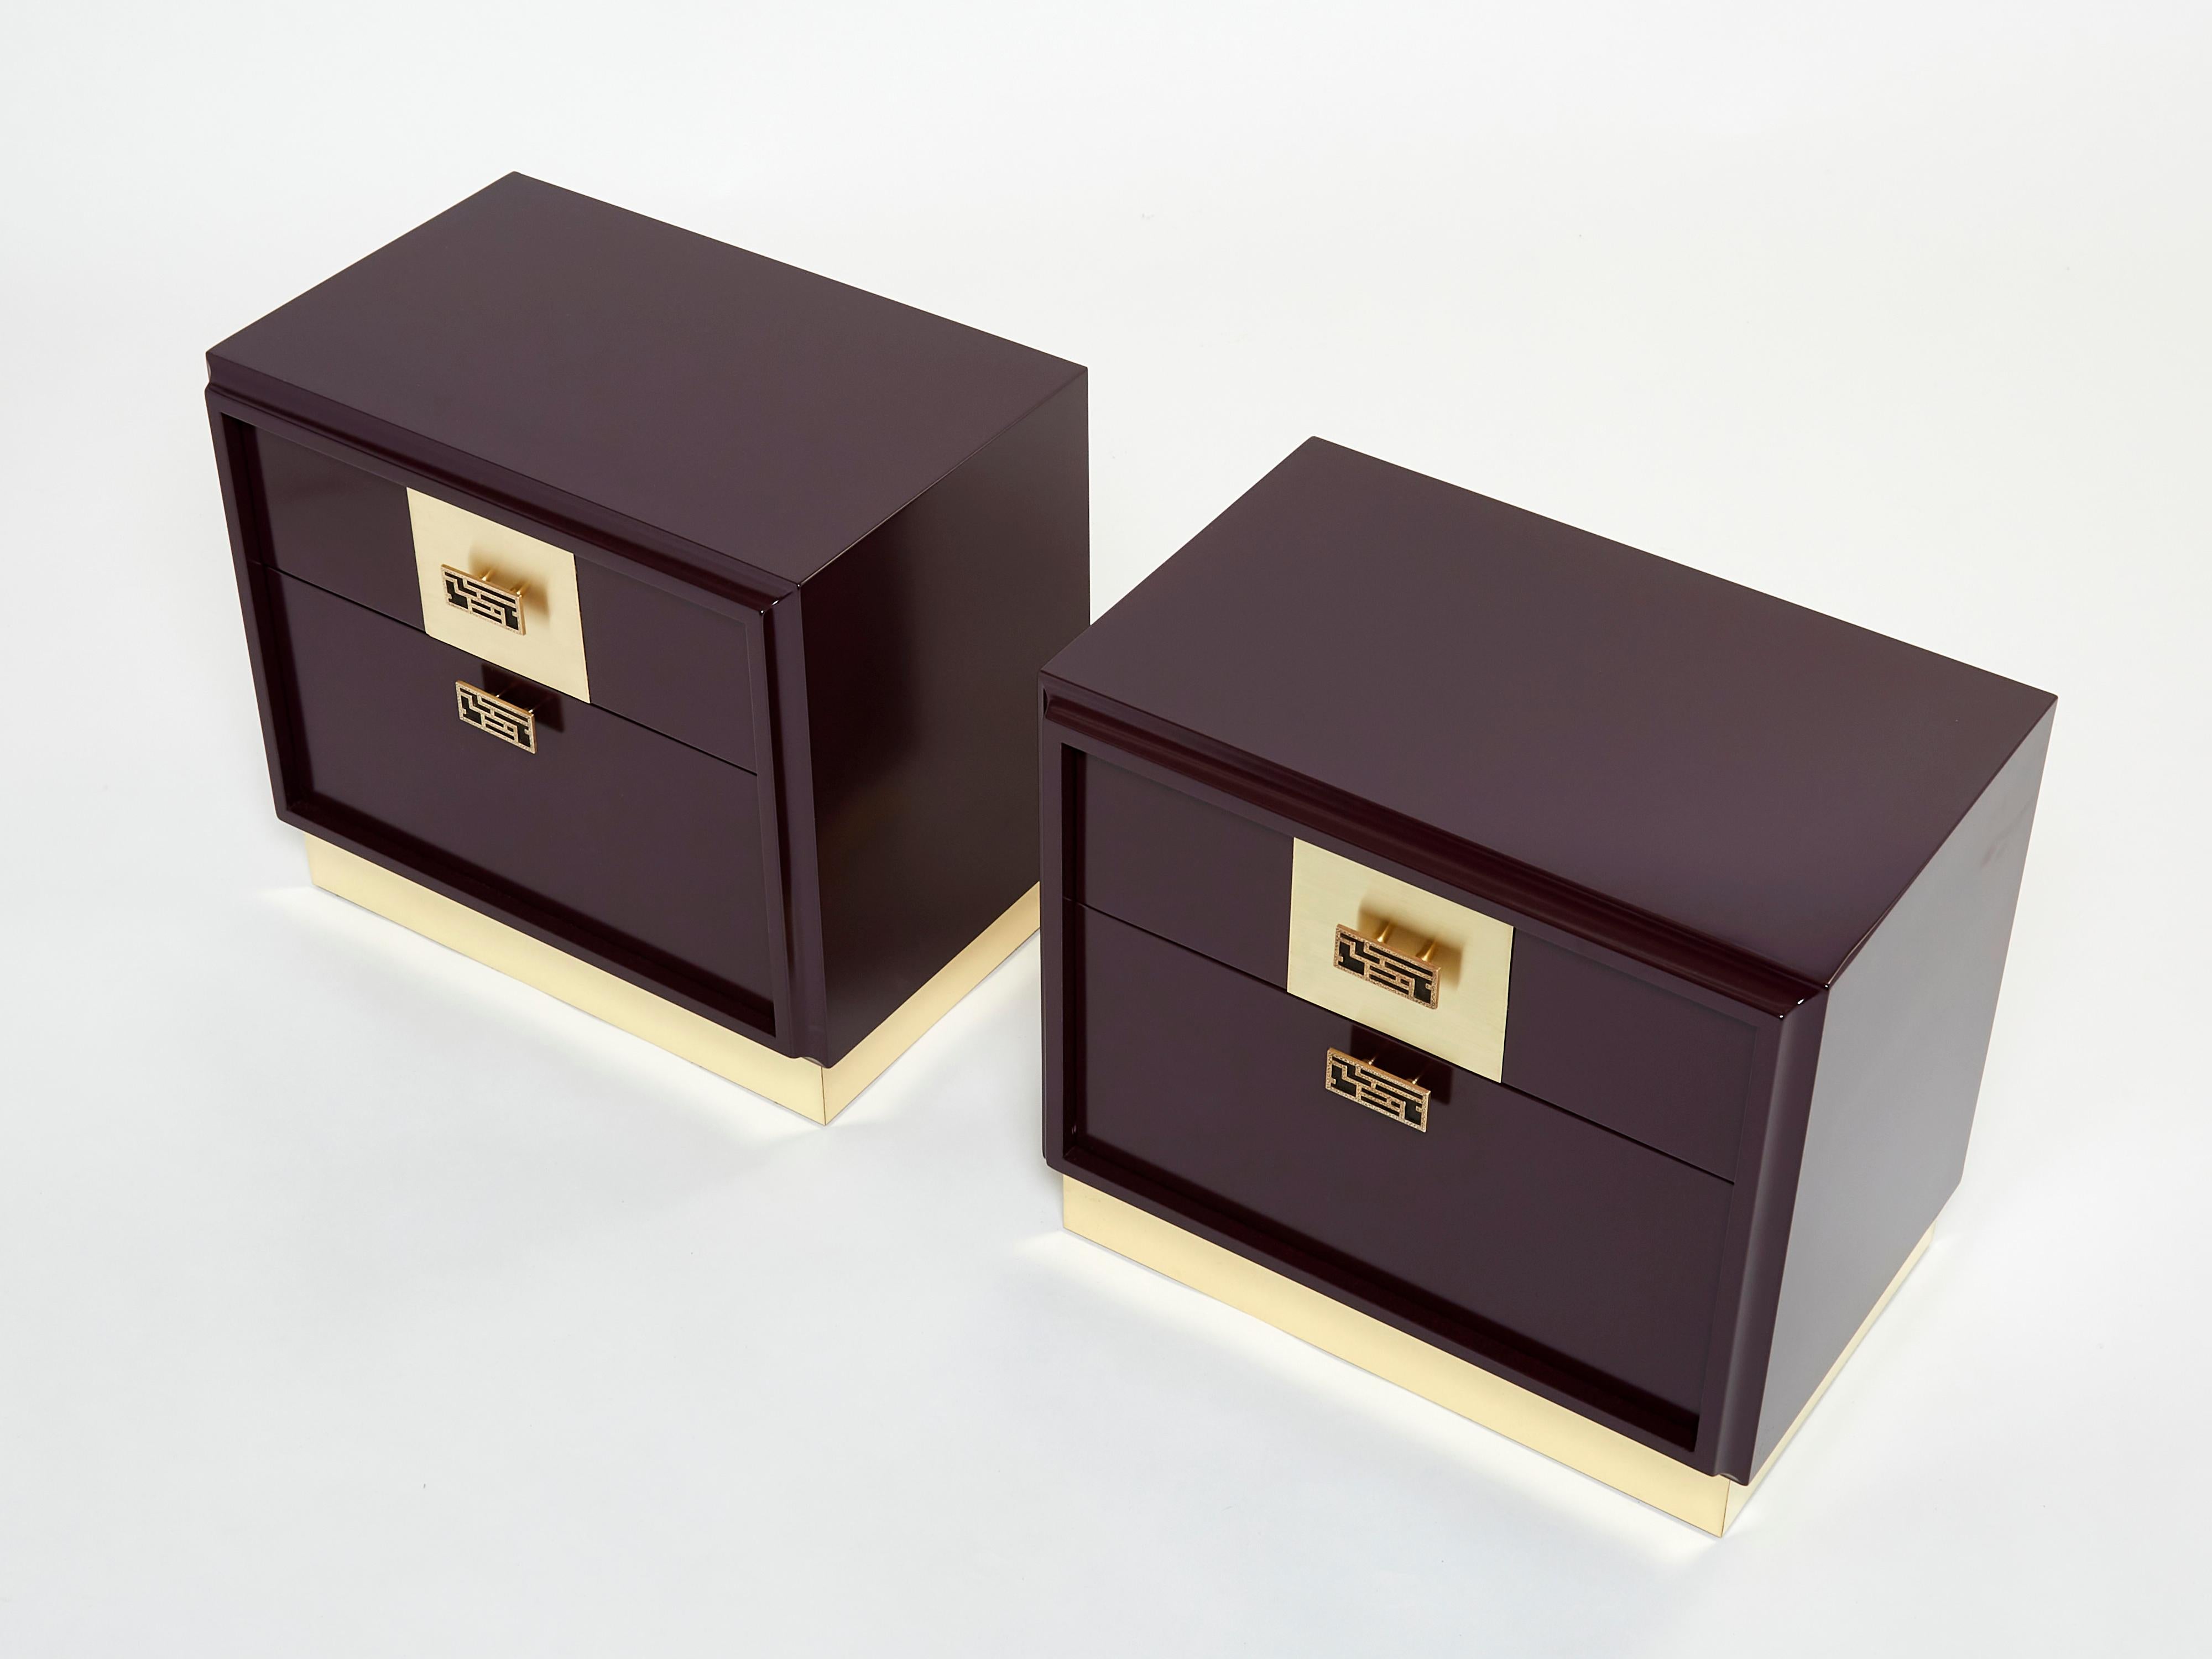 Pair of Italian Luciano Frigerio Plum Lacquered Brass Nightstands Tables, 1970s For Sale 1